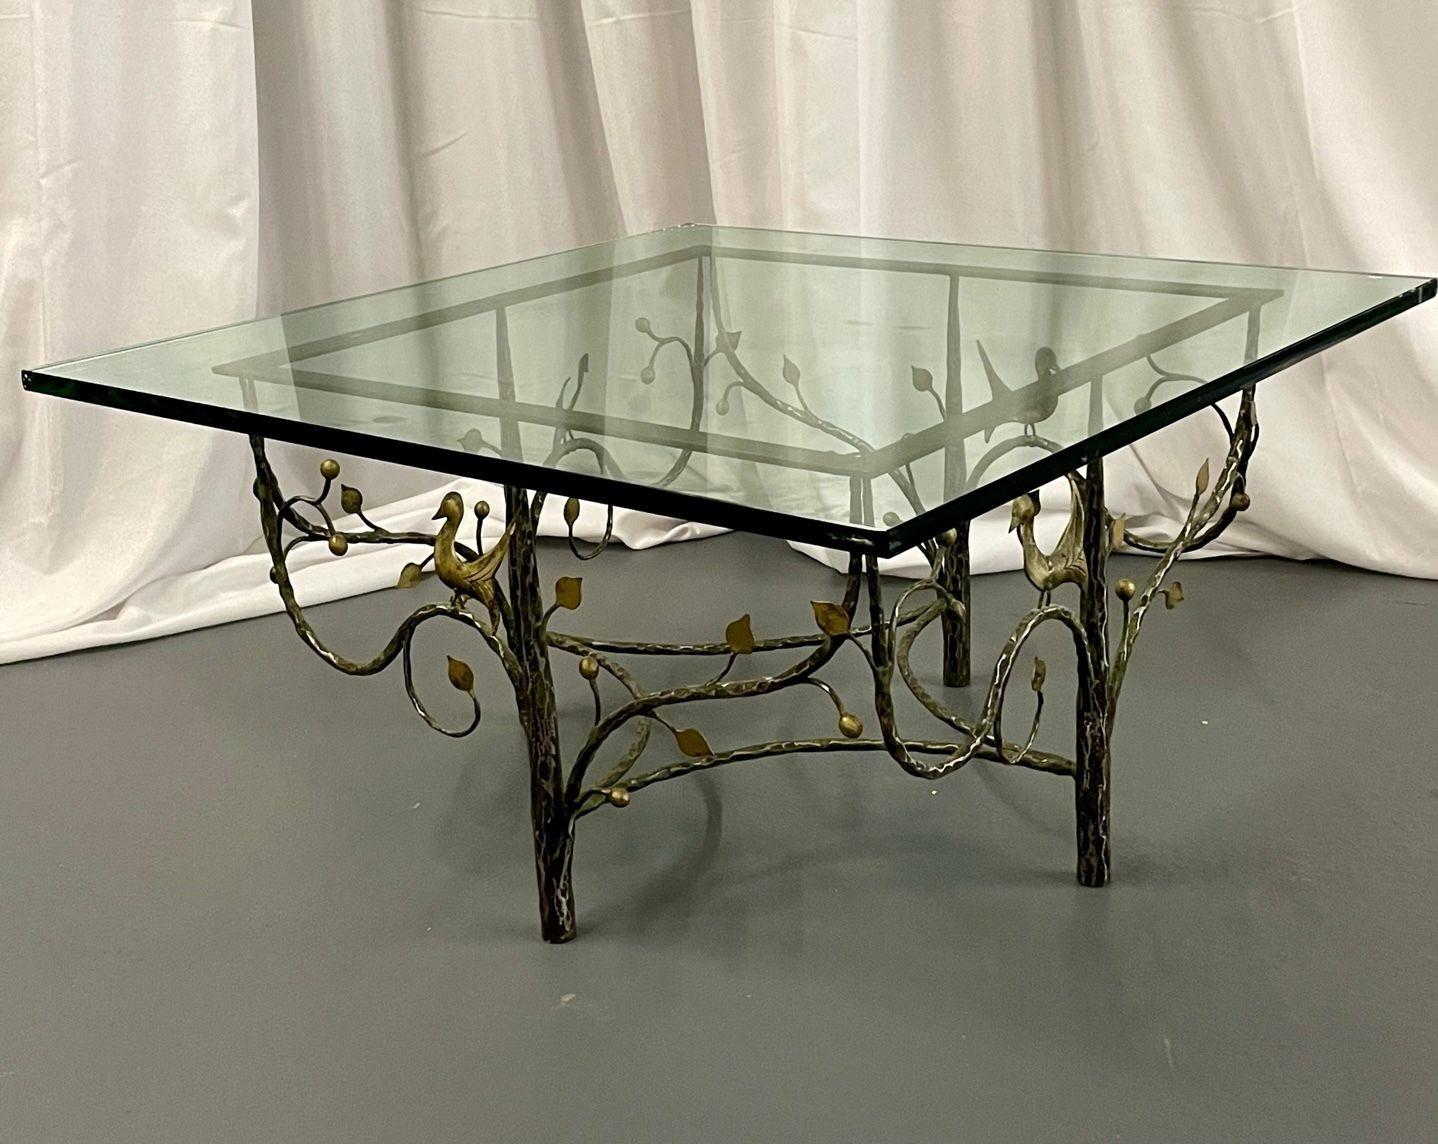 Mid-Century Modern William Switzer square coffee table, wrought iron, glass.
 
Unique Wrought Iron coffee table with an intricately detailed base having a Fall/Spring Motif. The iron base depicts scenes of birds and leaves. The table is finished